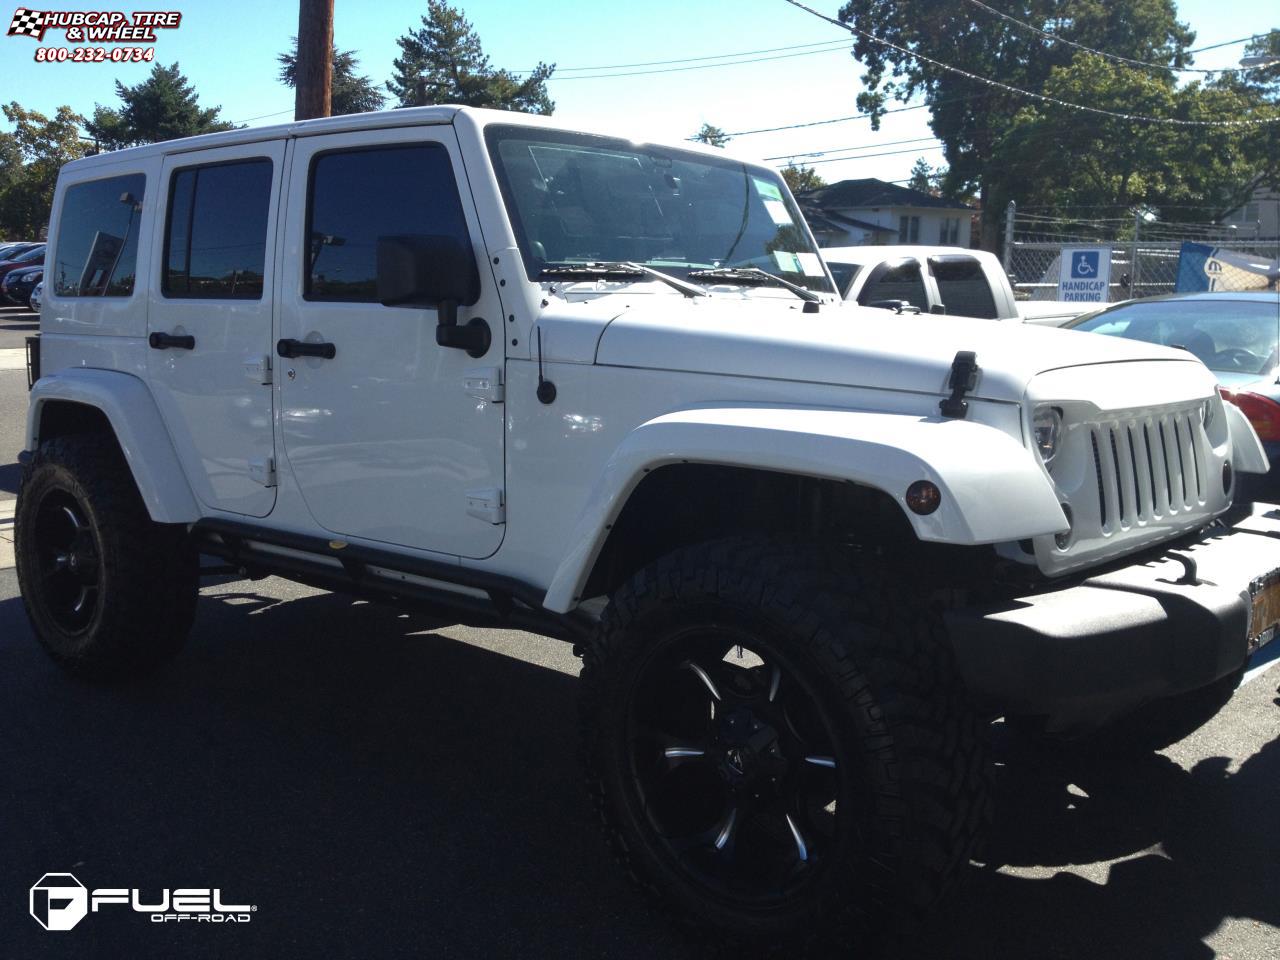 vehicle gallery/jeep wrangler fuel dune d523 0X0  Black & Milled wheels and rims